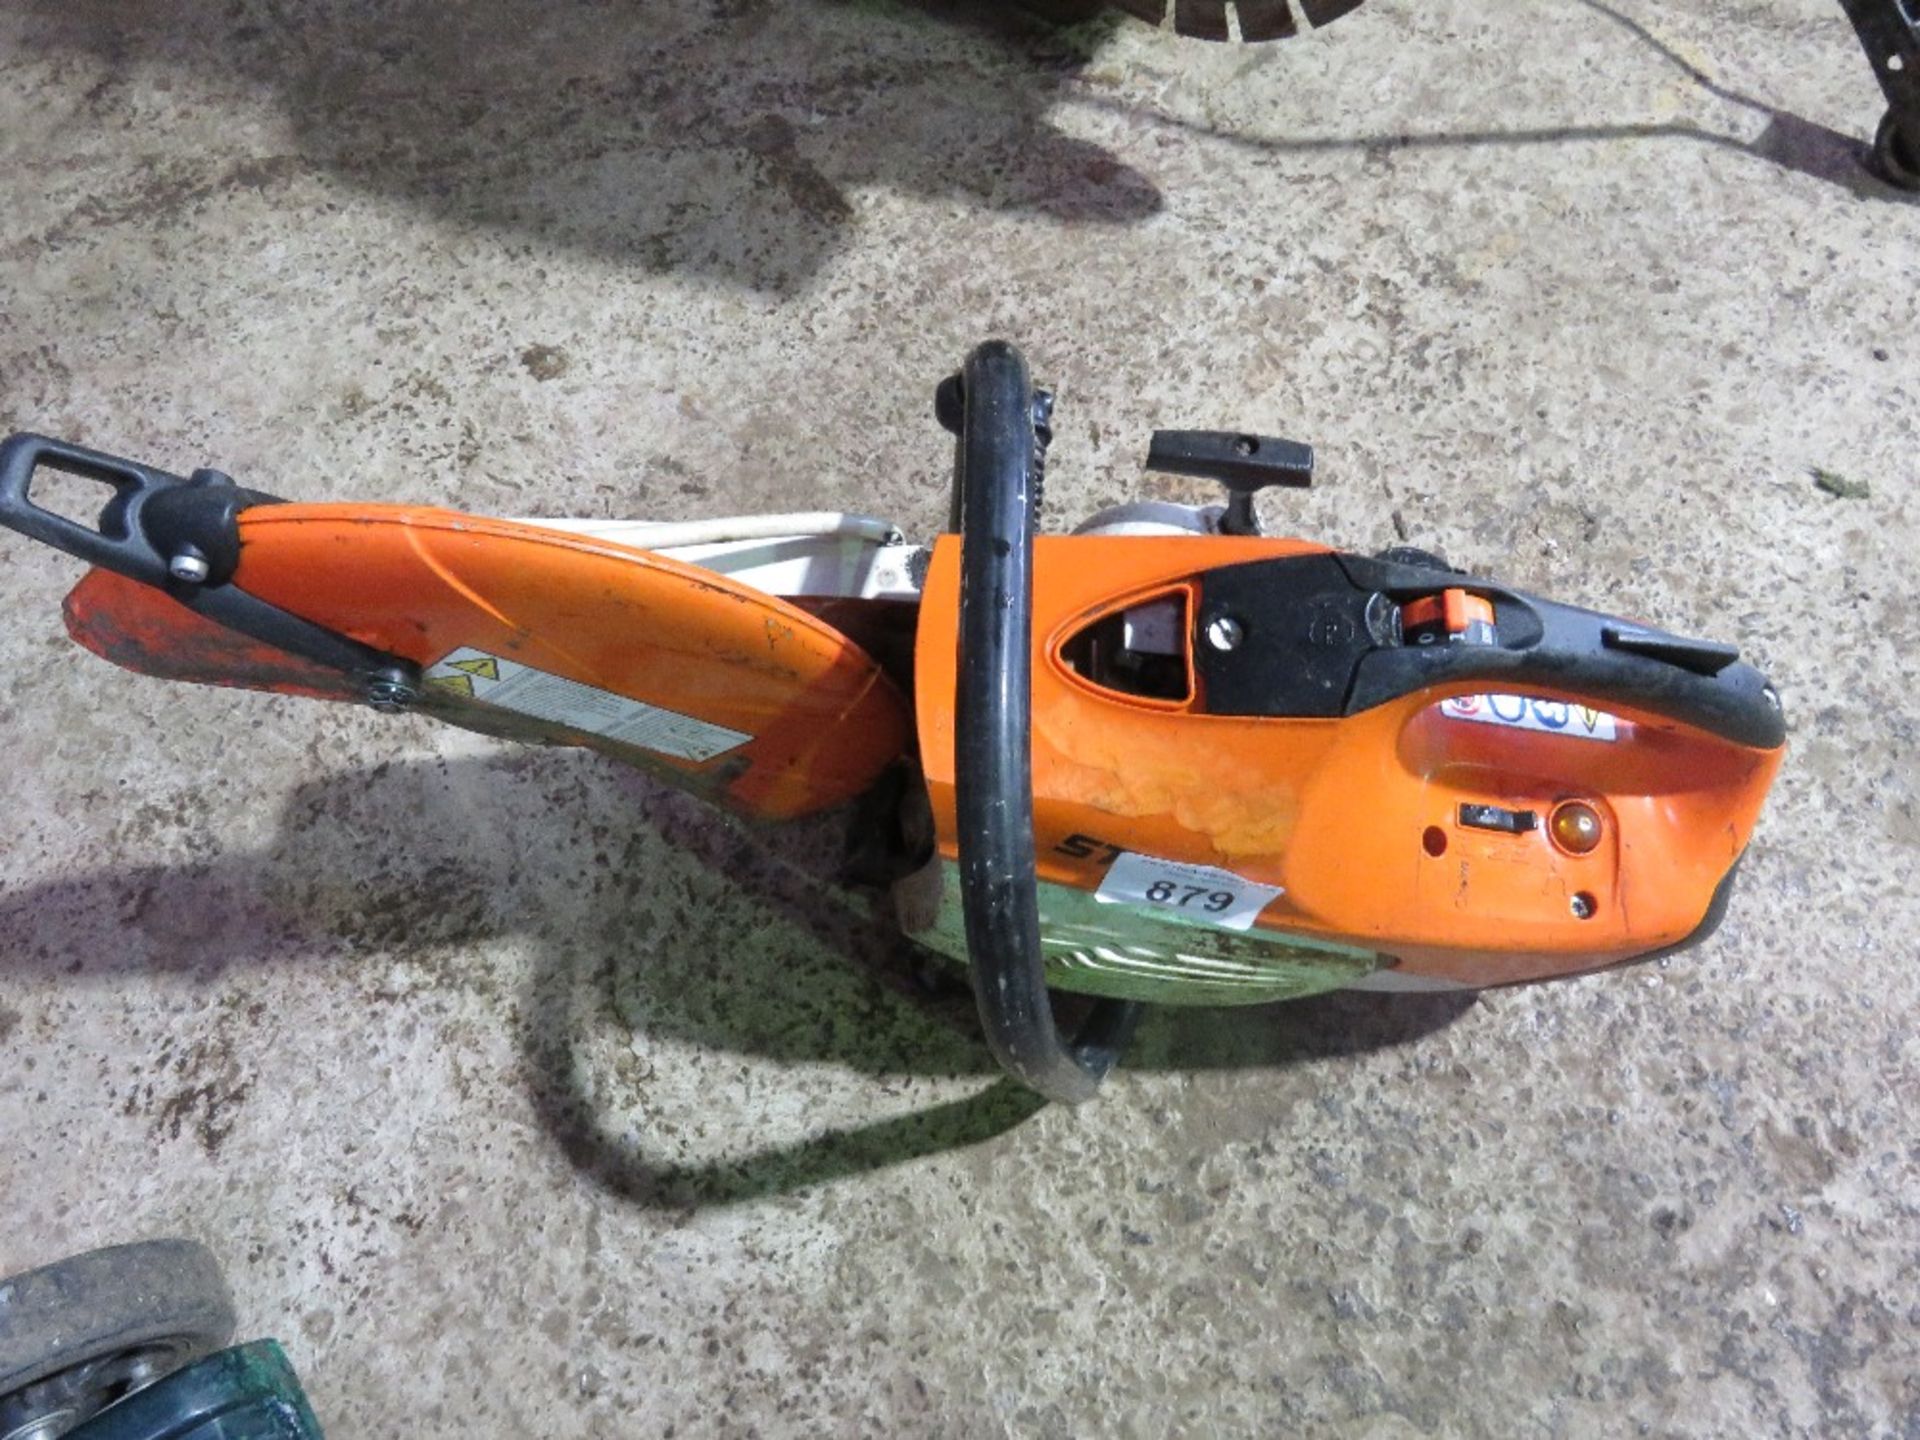 STIHL TS410 PETROL ENGINED CUT OFF SAW. THIS LOT IS SOLD UNDER THE AUCTIONEERS MARGIN SCHEME, THE - Image 4 of 4